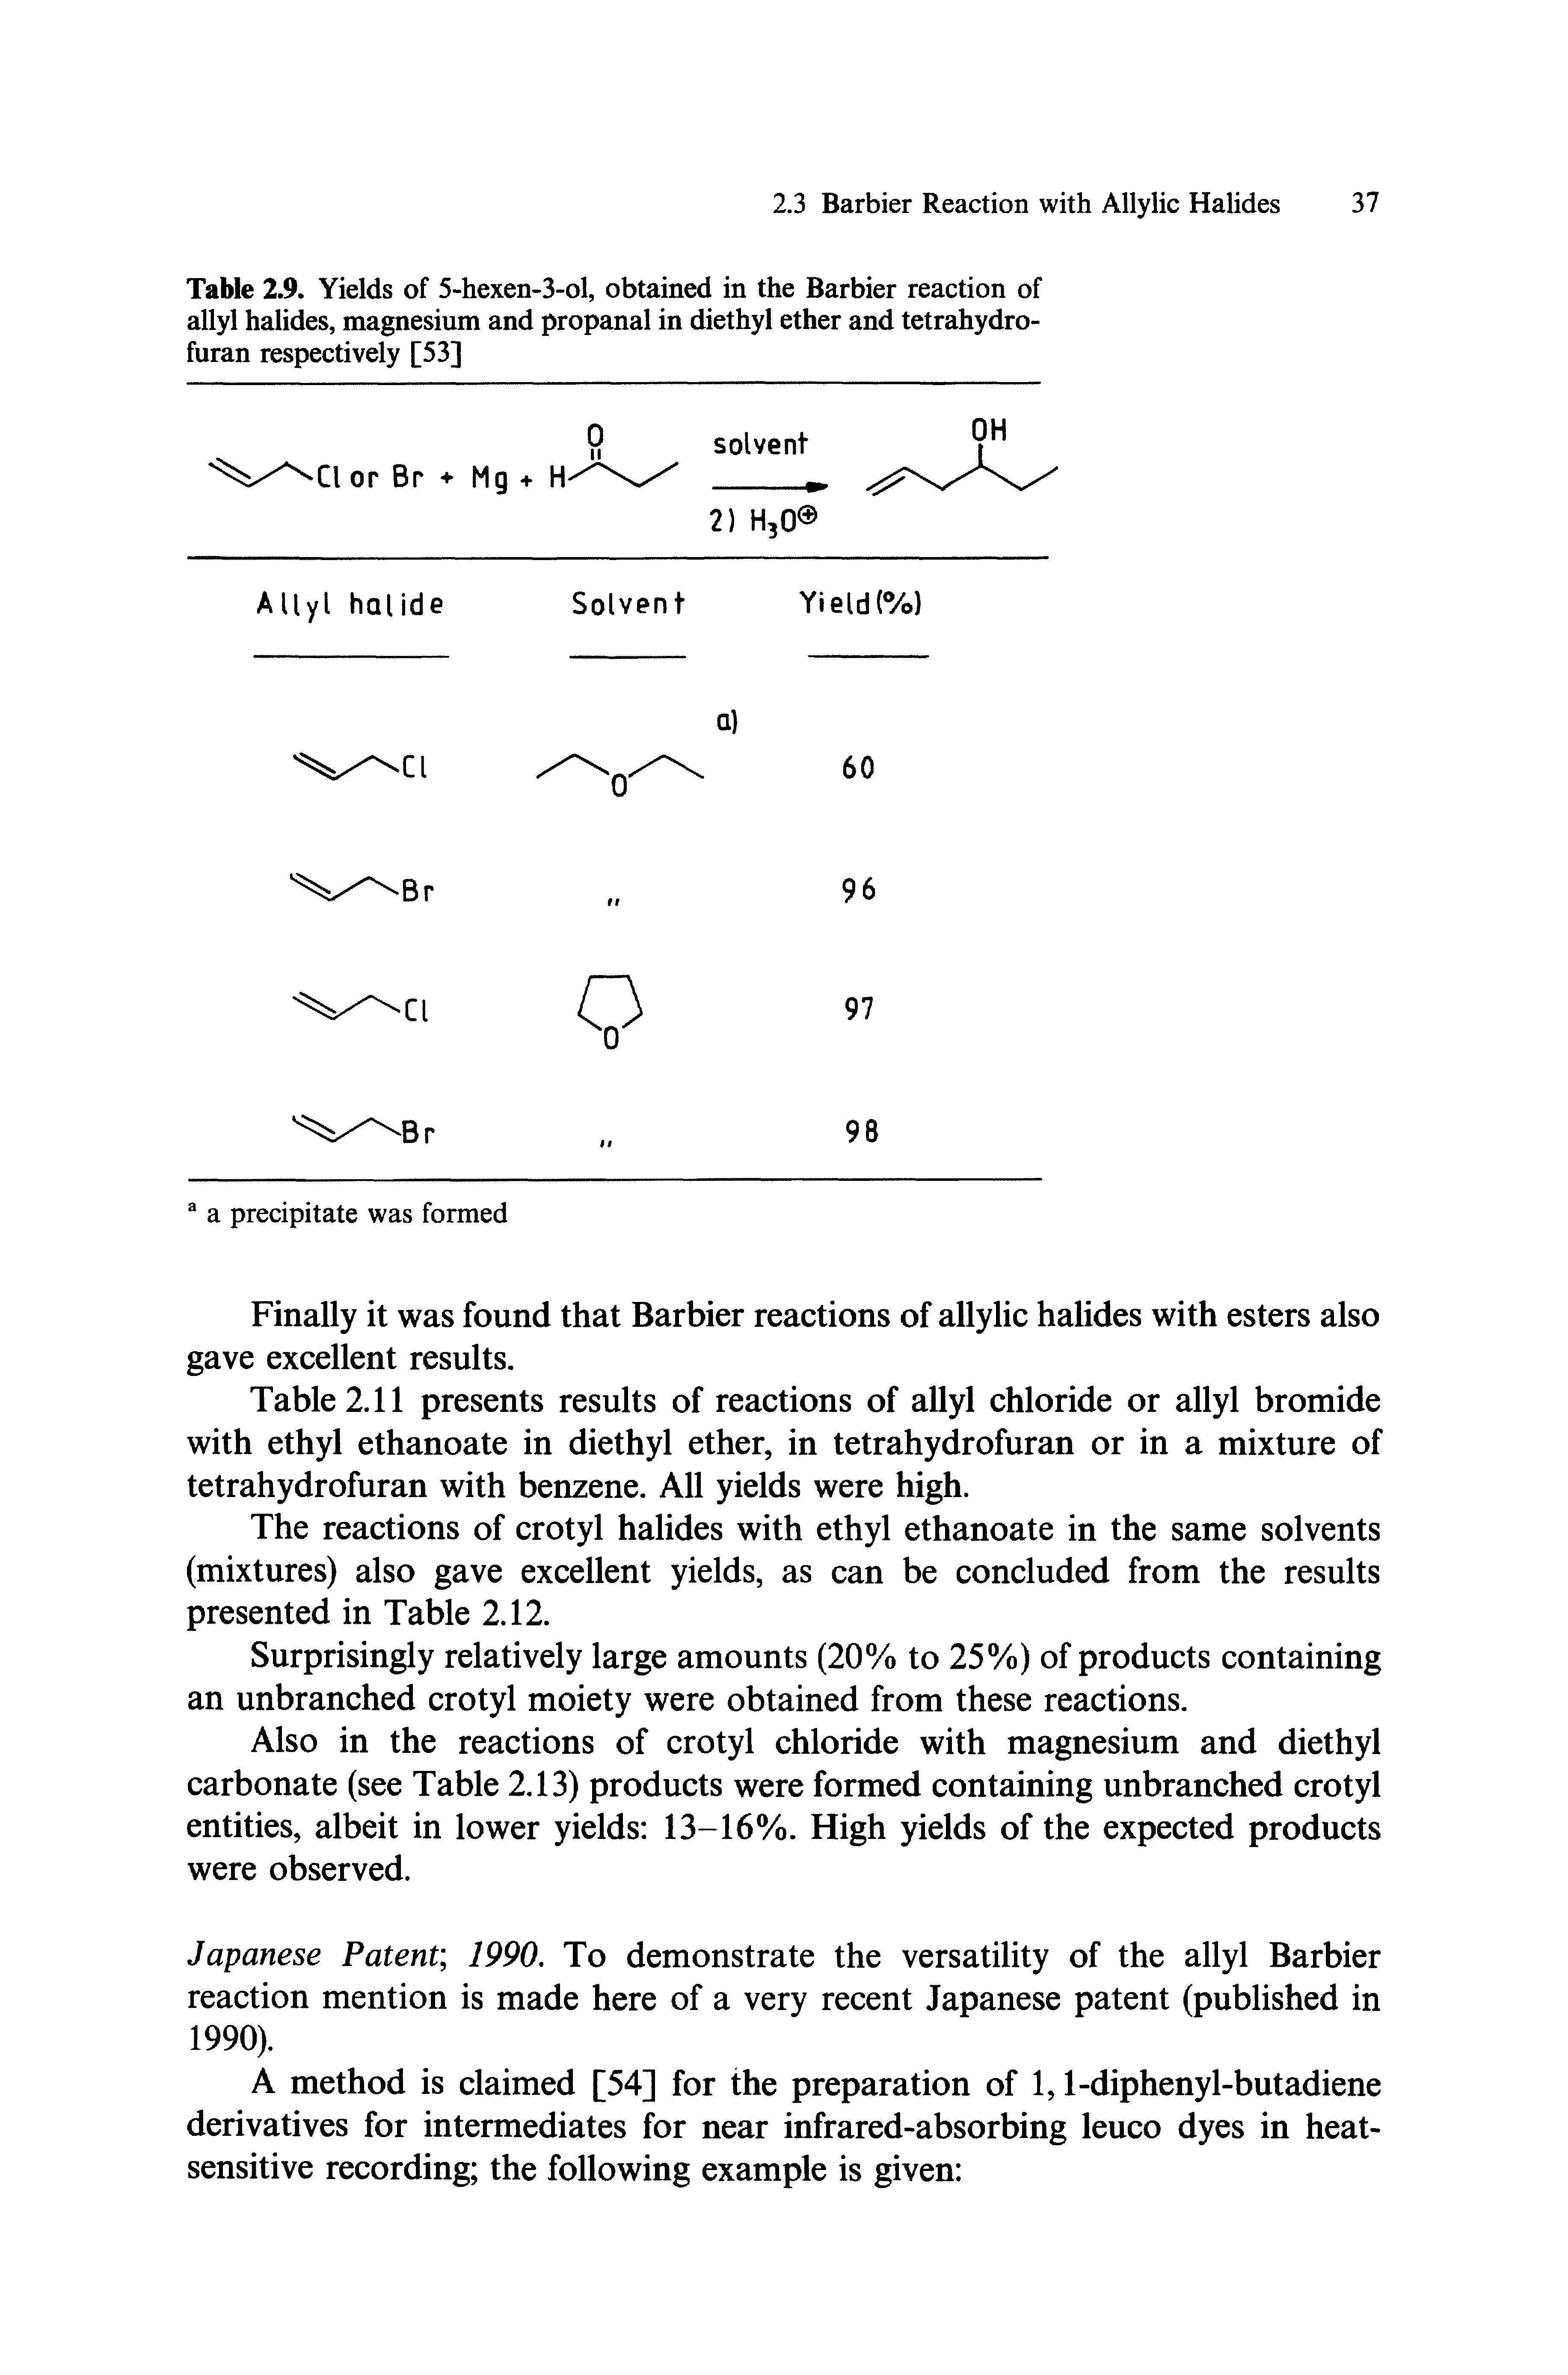 Table 2.9. Yields of 5-hexen-3-ol, obtained in the Barbier reaction of allyl halides, magnesium and propanal in diethyl ether and tetrahydro-furan respectively [53]...